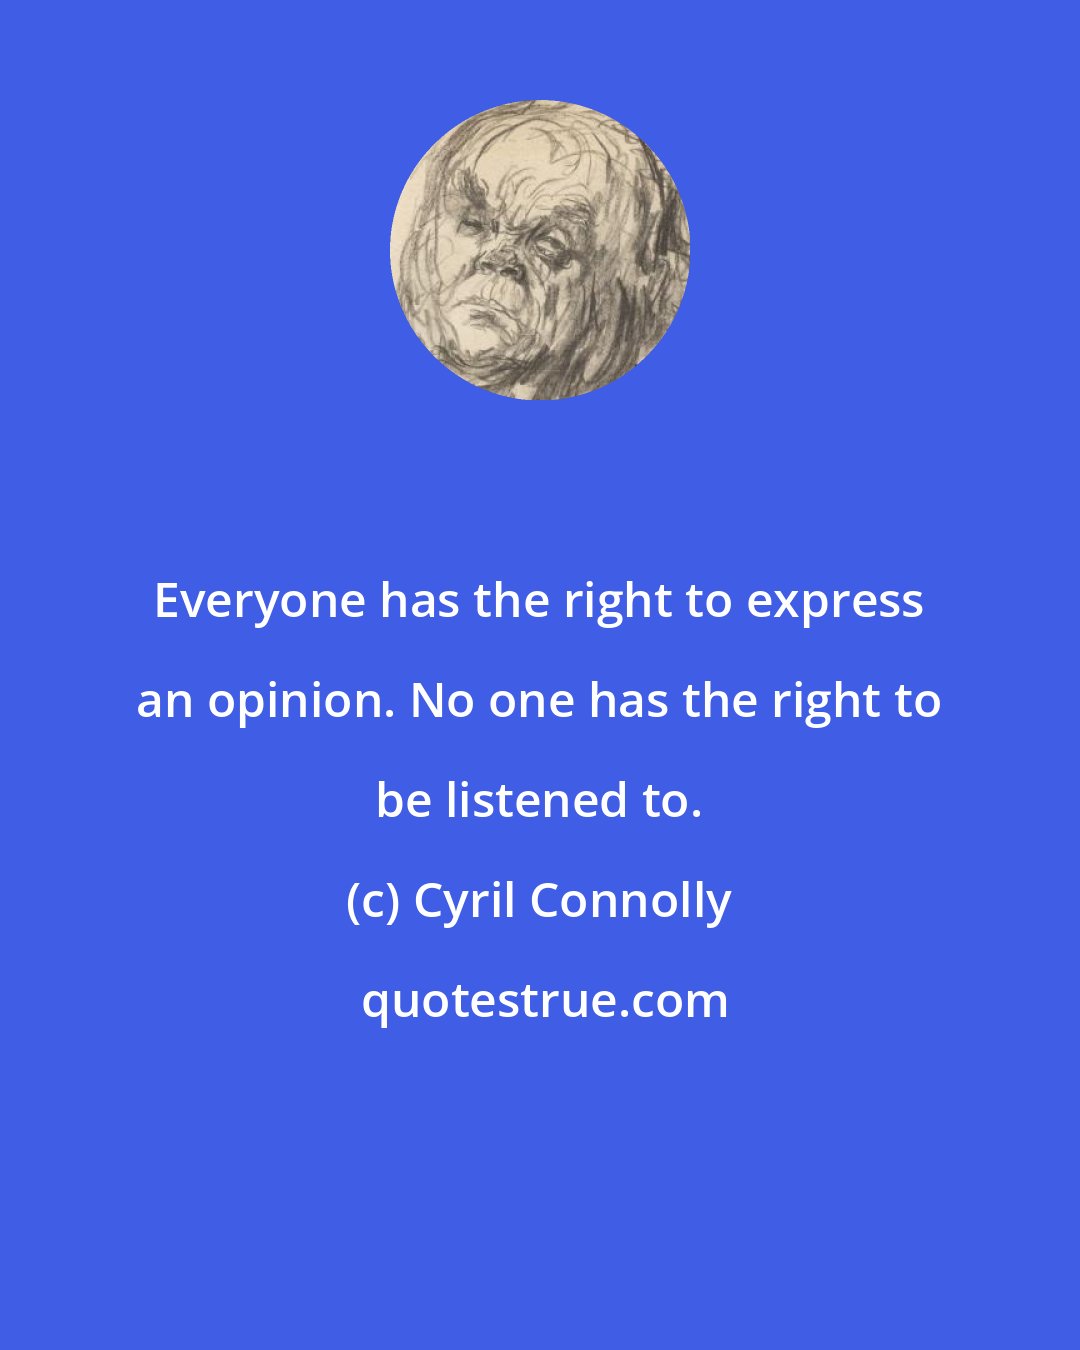 Cyril Connolly: Everyone has the right to express an opinion. No one has the right to be listened to.